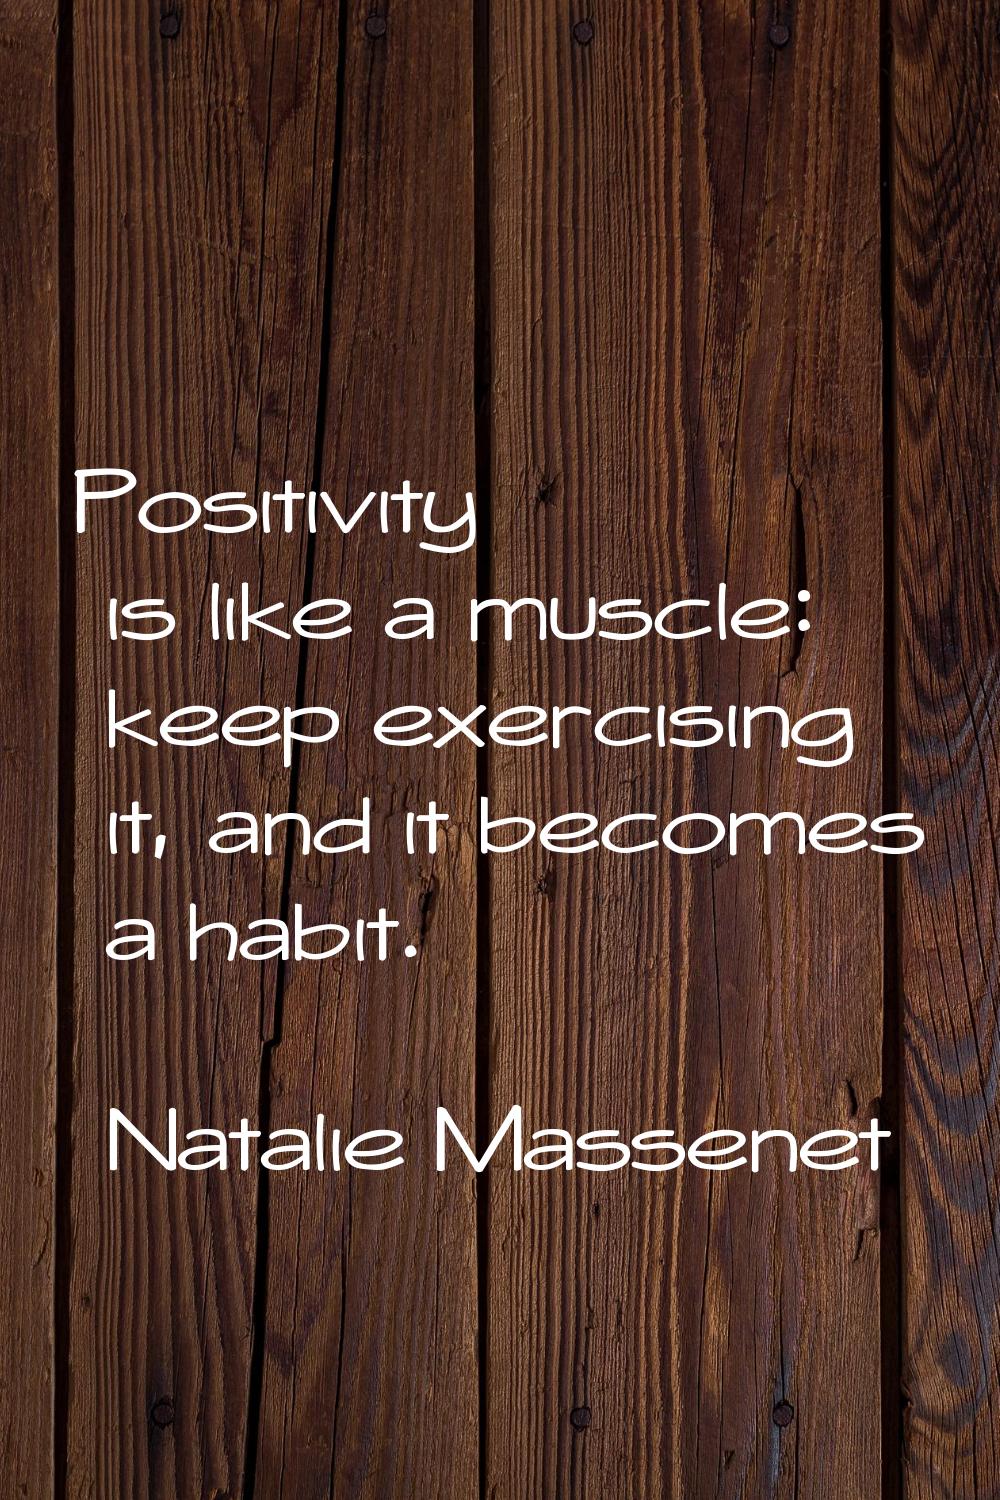 Positivity is like a muscle: keep exercising it, and it becomes a habit.